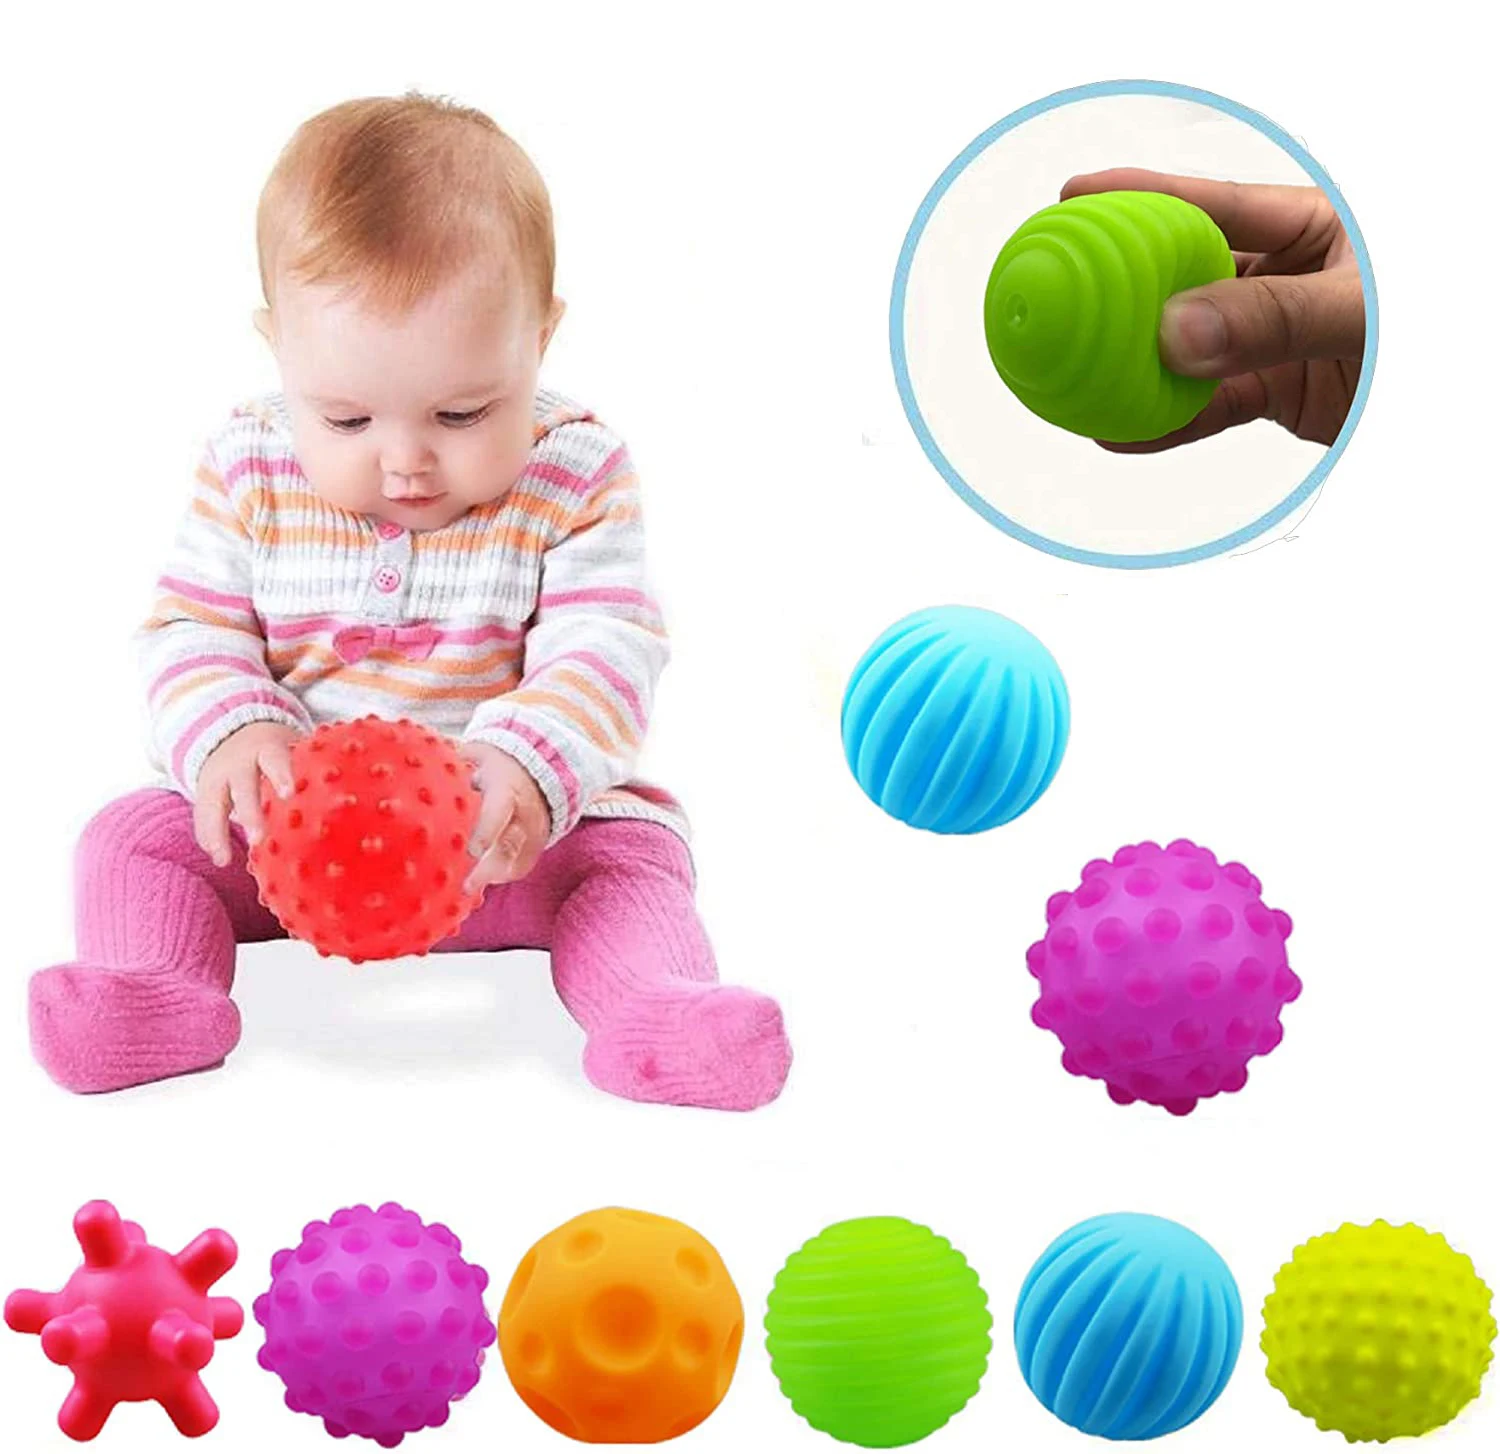 

6pcs Baby Sensory Ball Set Soft Textured Squeeze Balls Montessori Toys Easter Egg for Babies Toddlers 3-12 Months Exploration